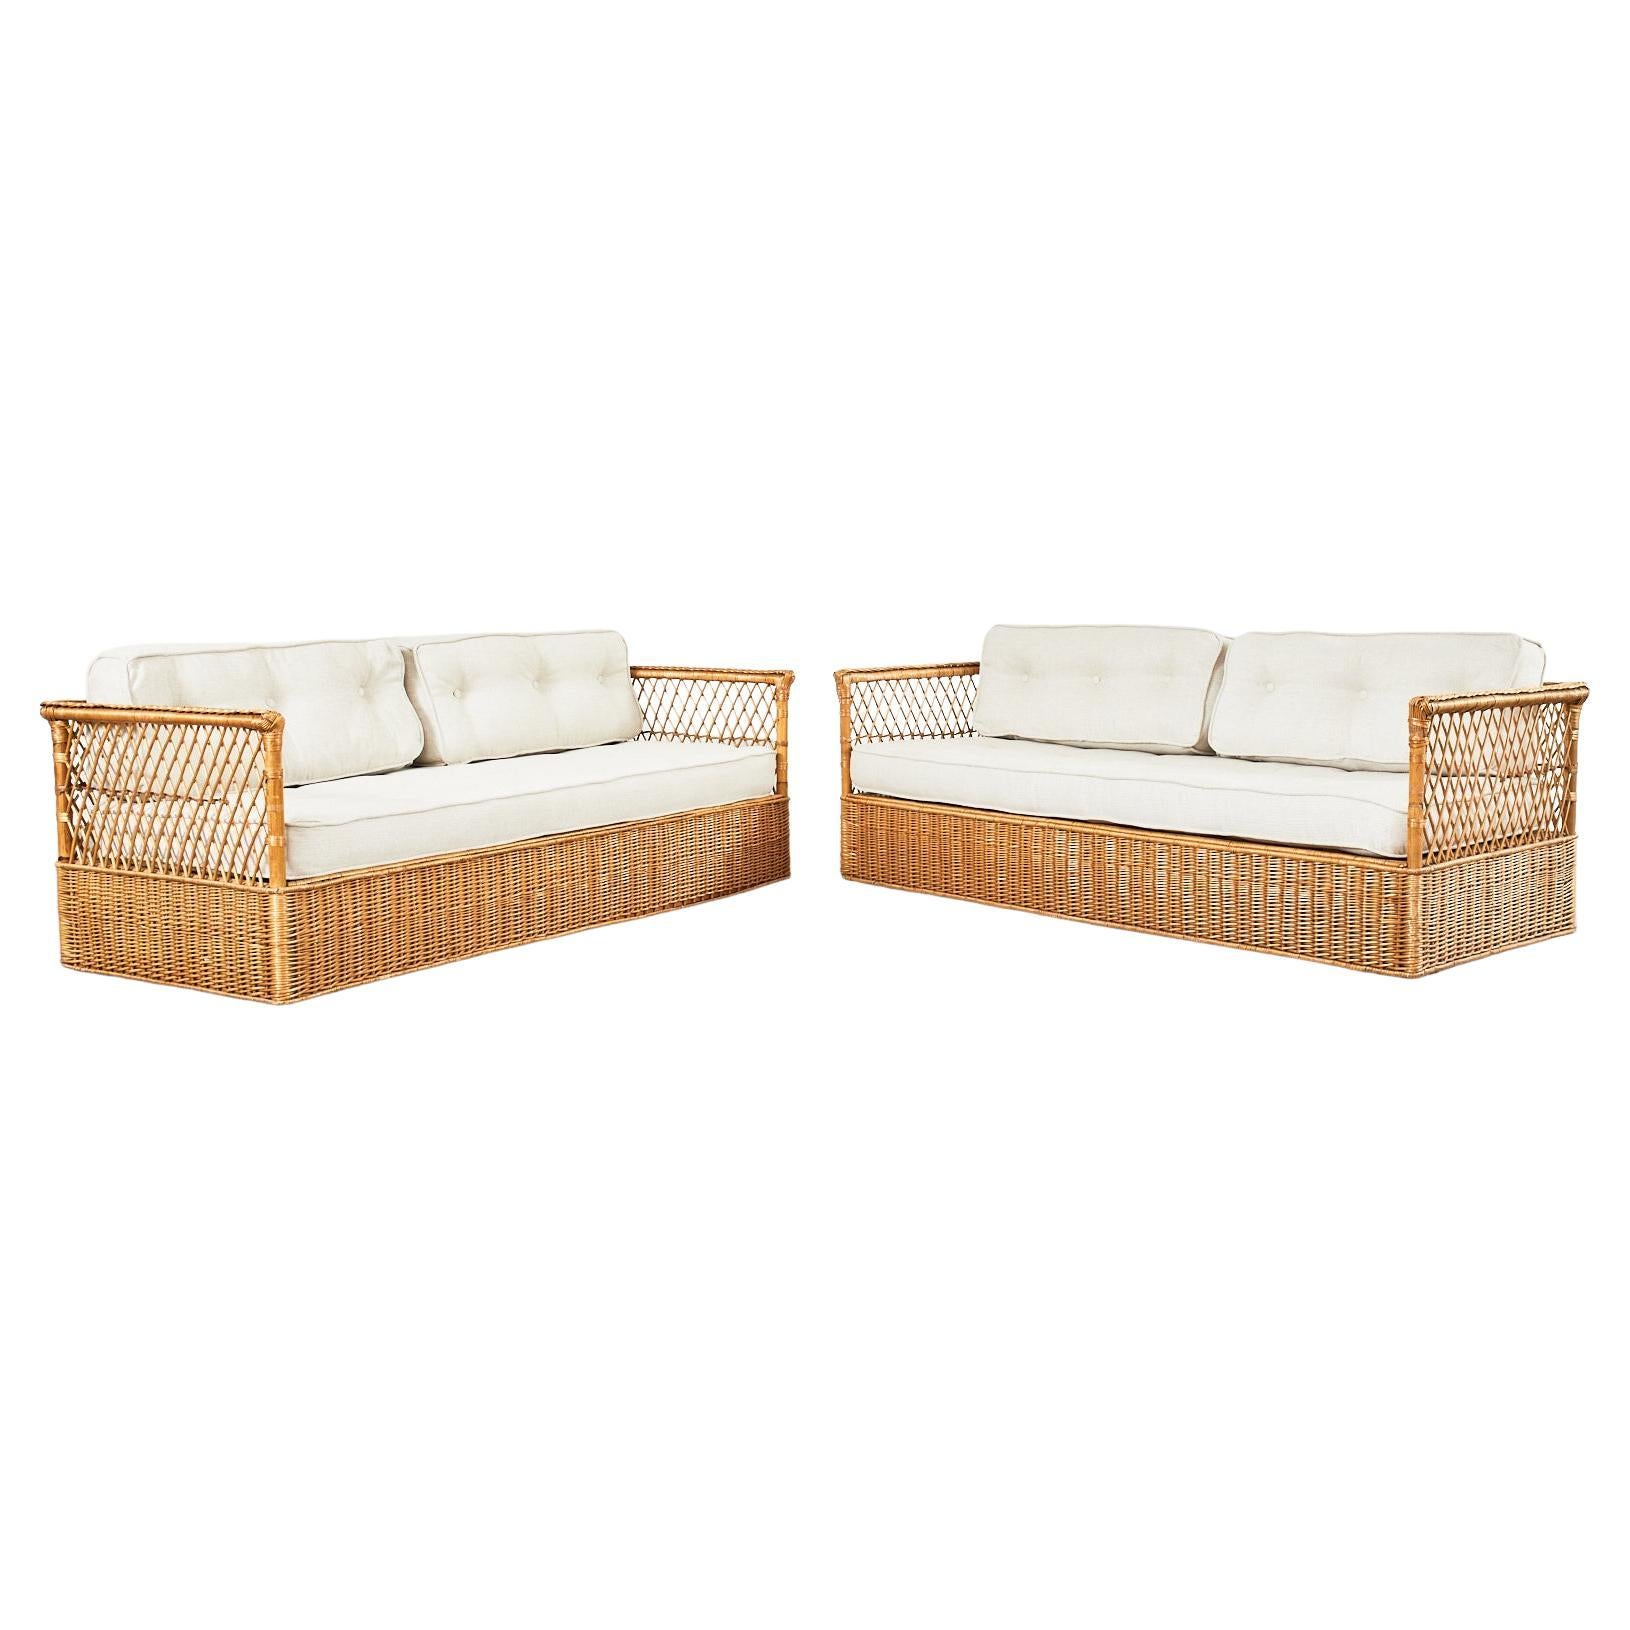 Pair of McGuire Rattan Wicker Case Sofa Settee Daybeds